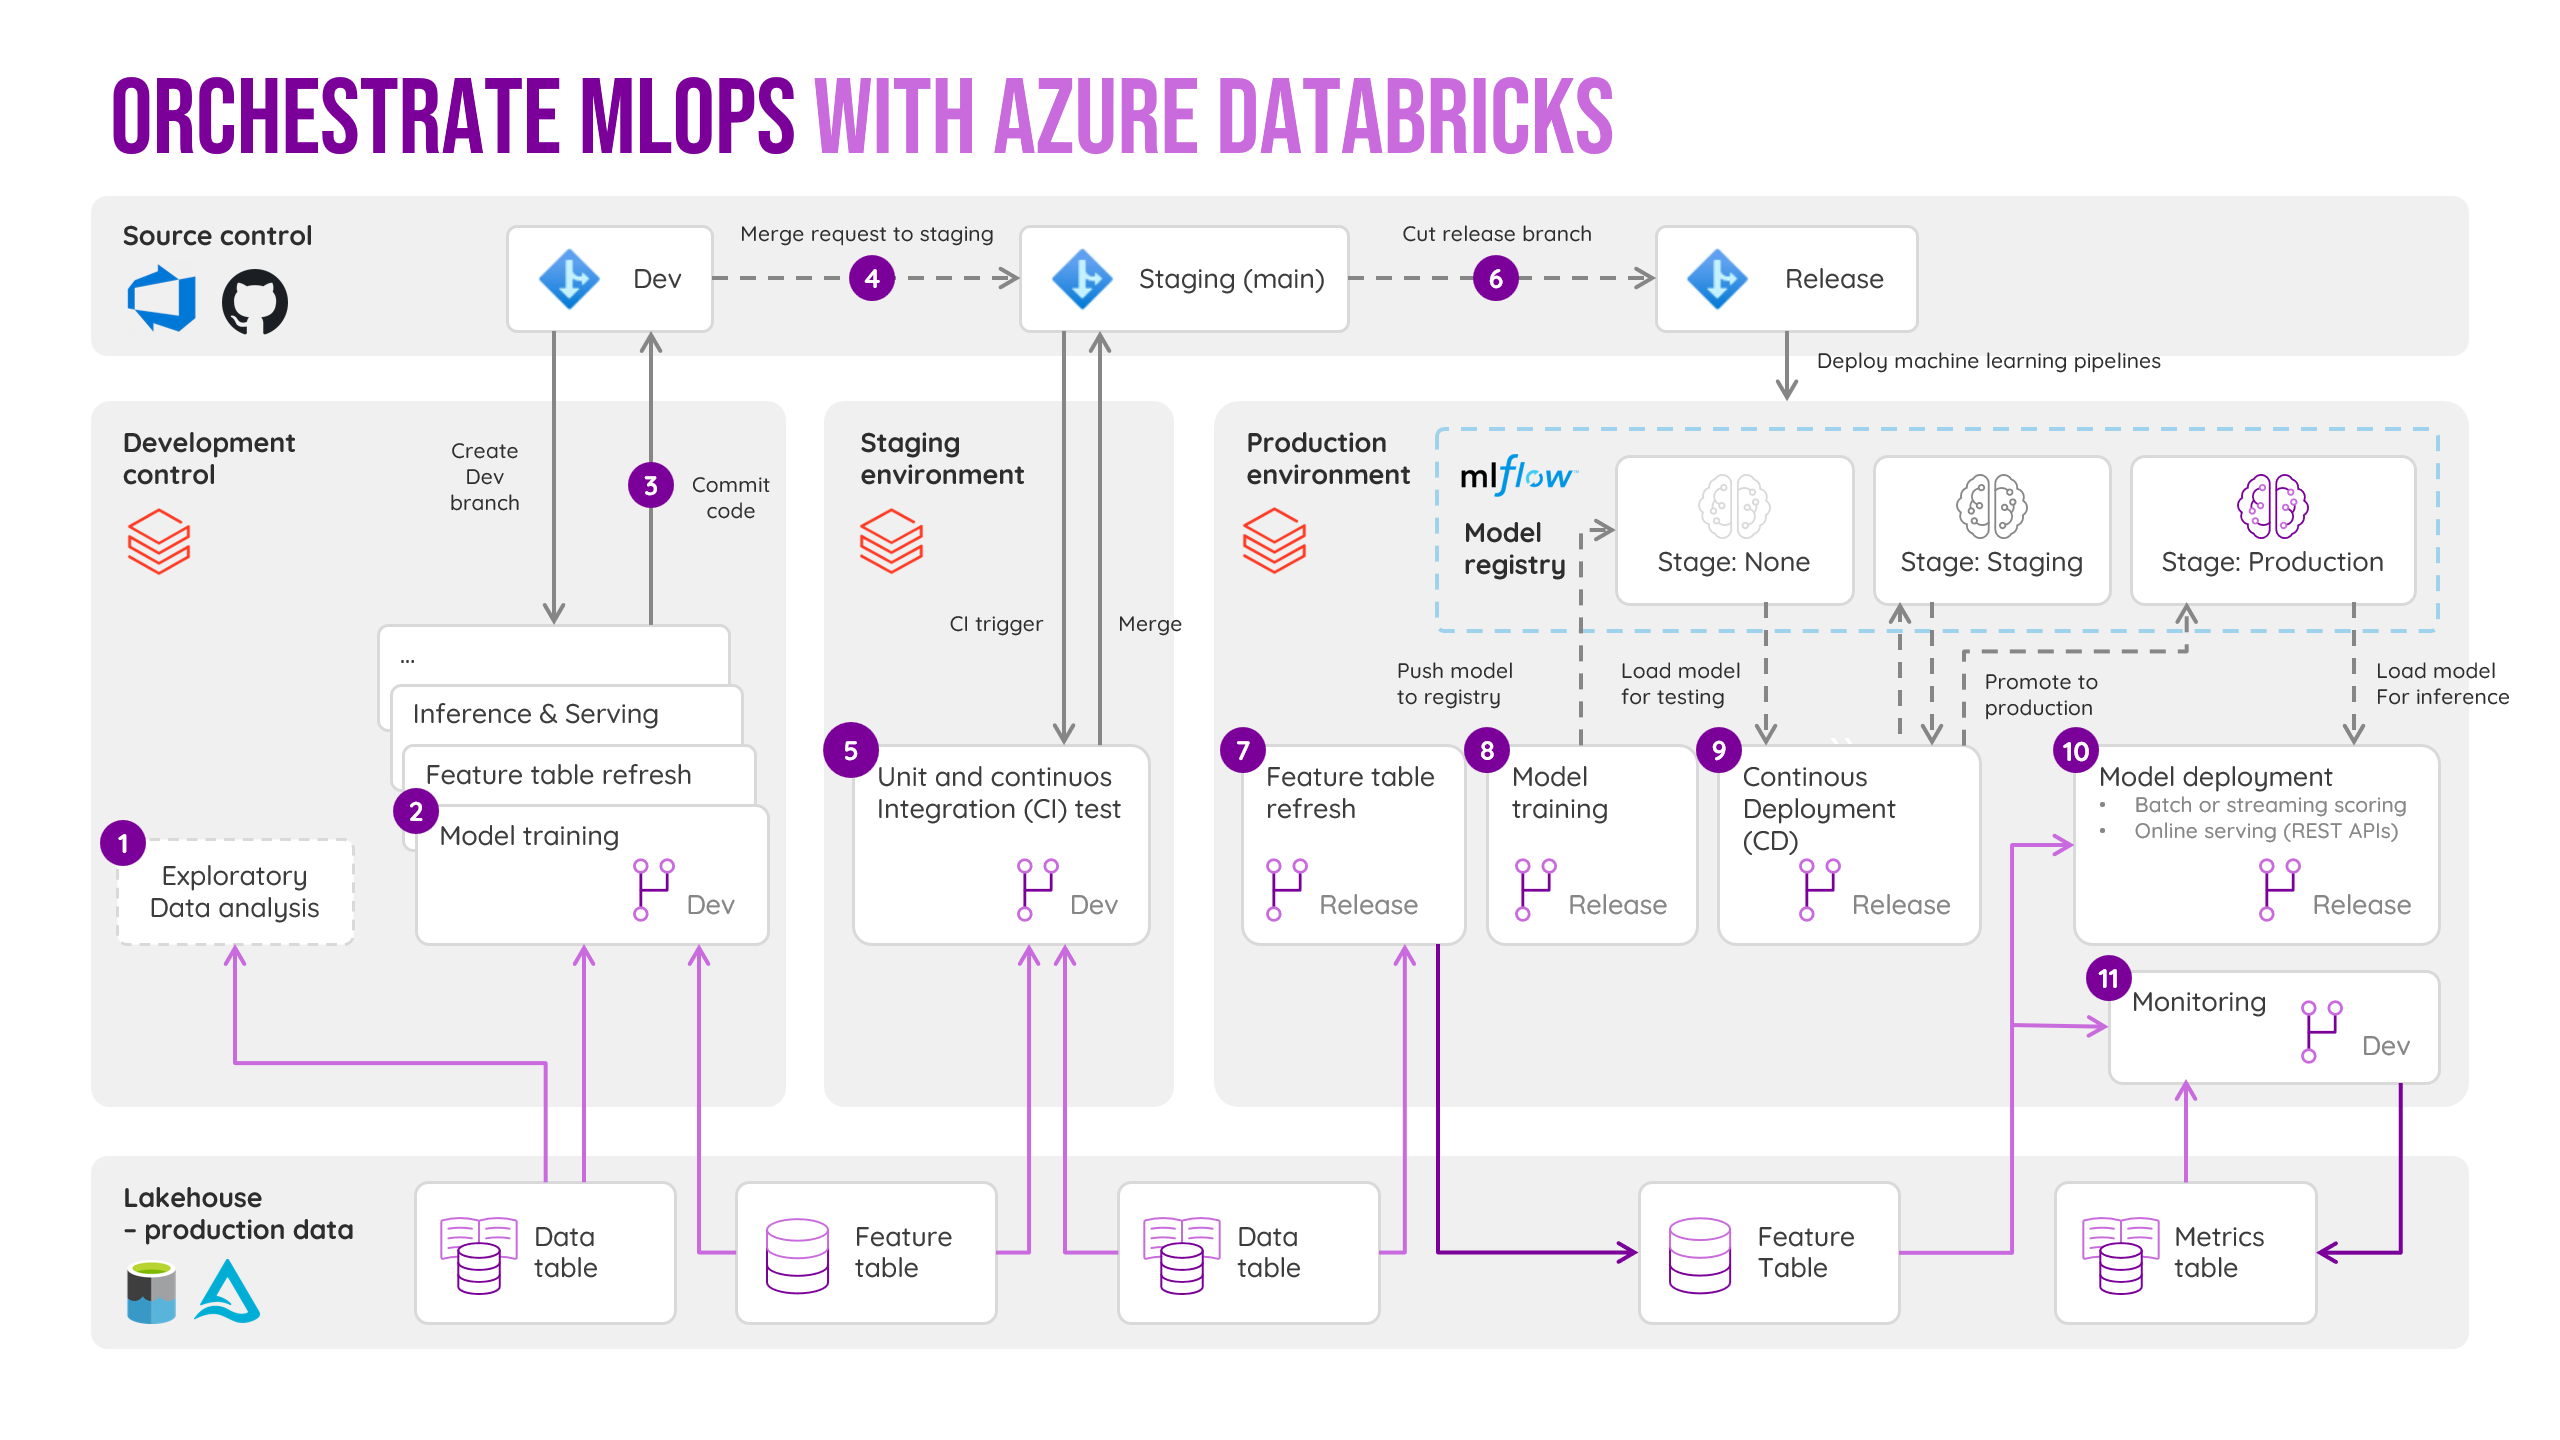 Illustration of Orchestrate MLOps with Azure Databricks